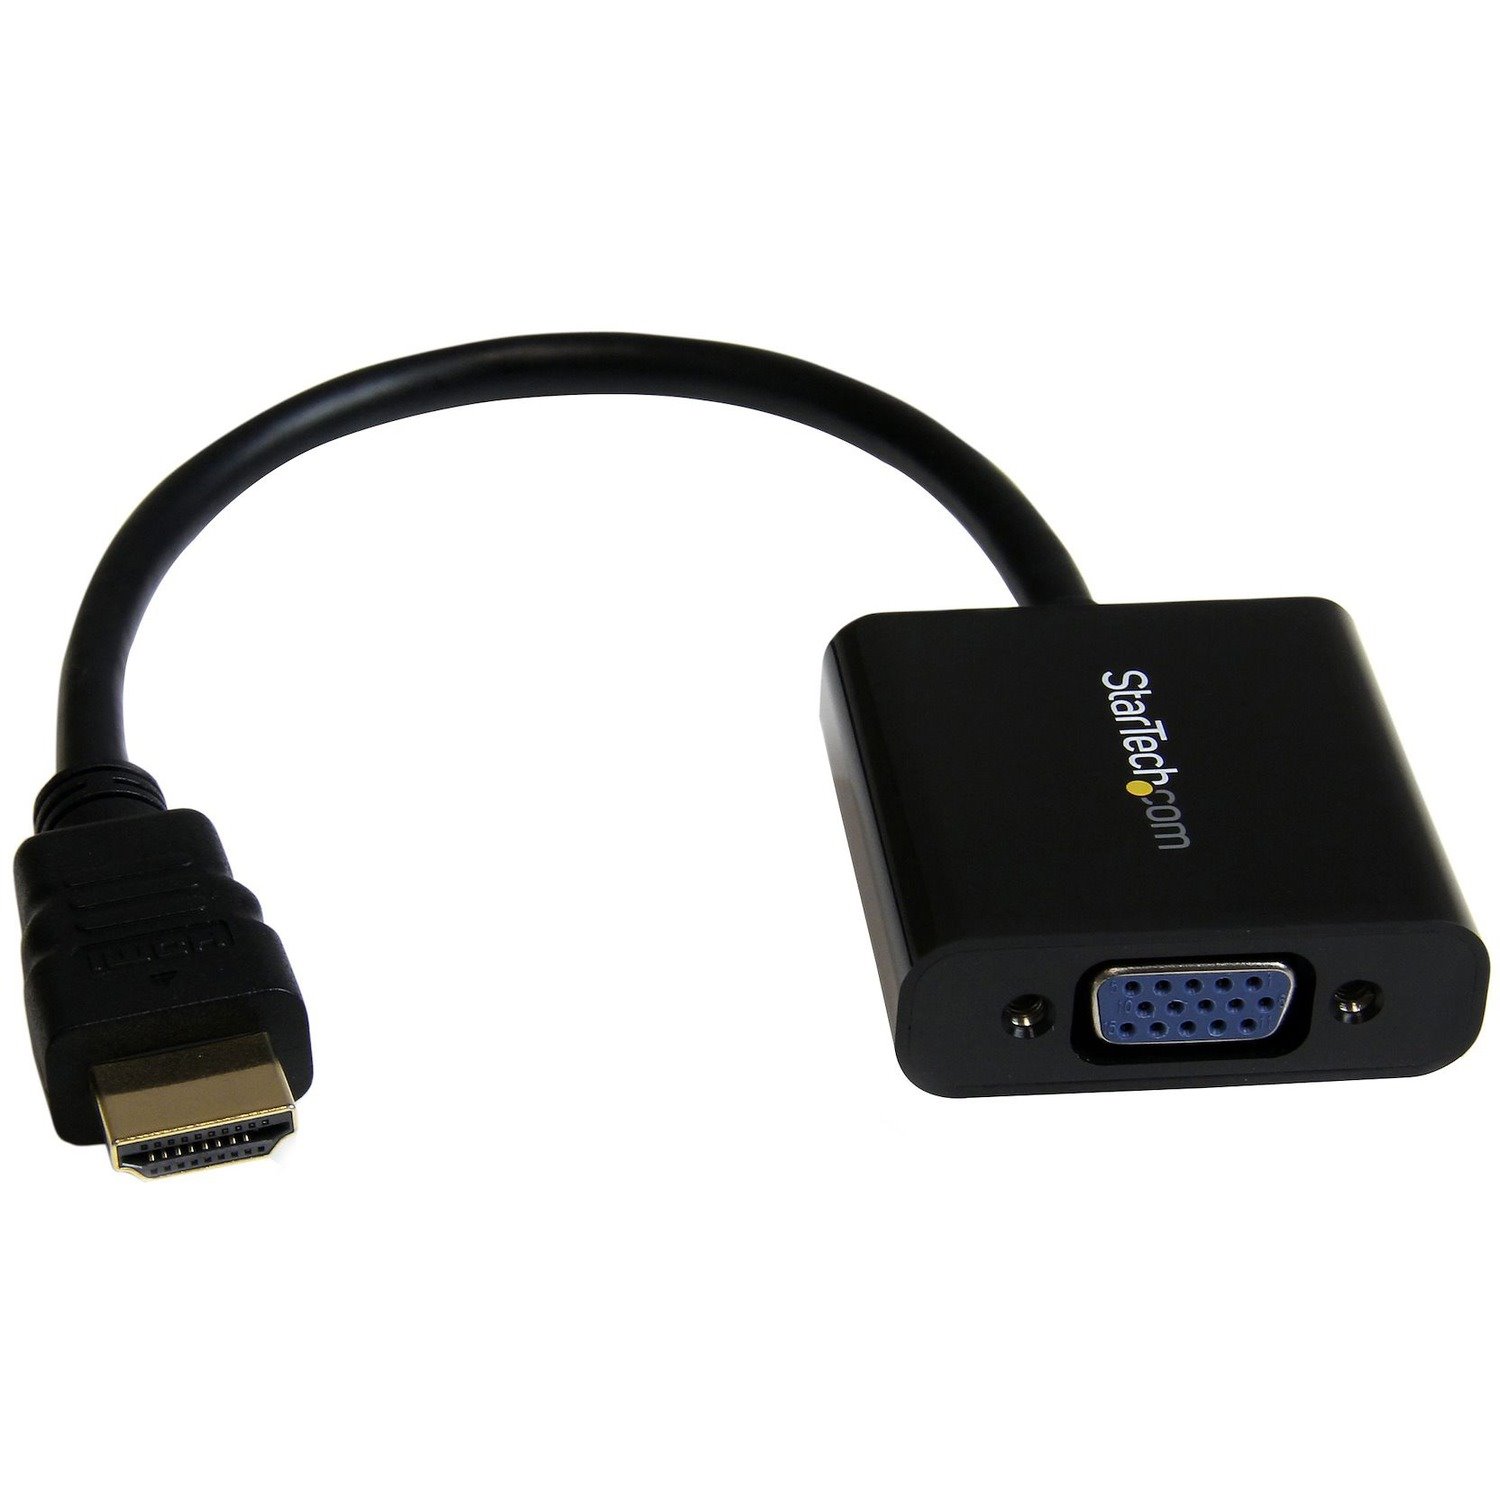 StarTech.com 1080p 60Hz HDMI to VGA High Speed Display Adapter - Active HDMI to VGA (Male to Female) Video Converter for Laptop/PC/Monitor (HD2VGAE2)